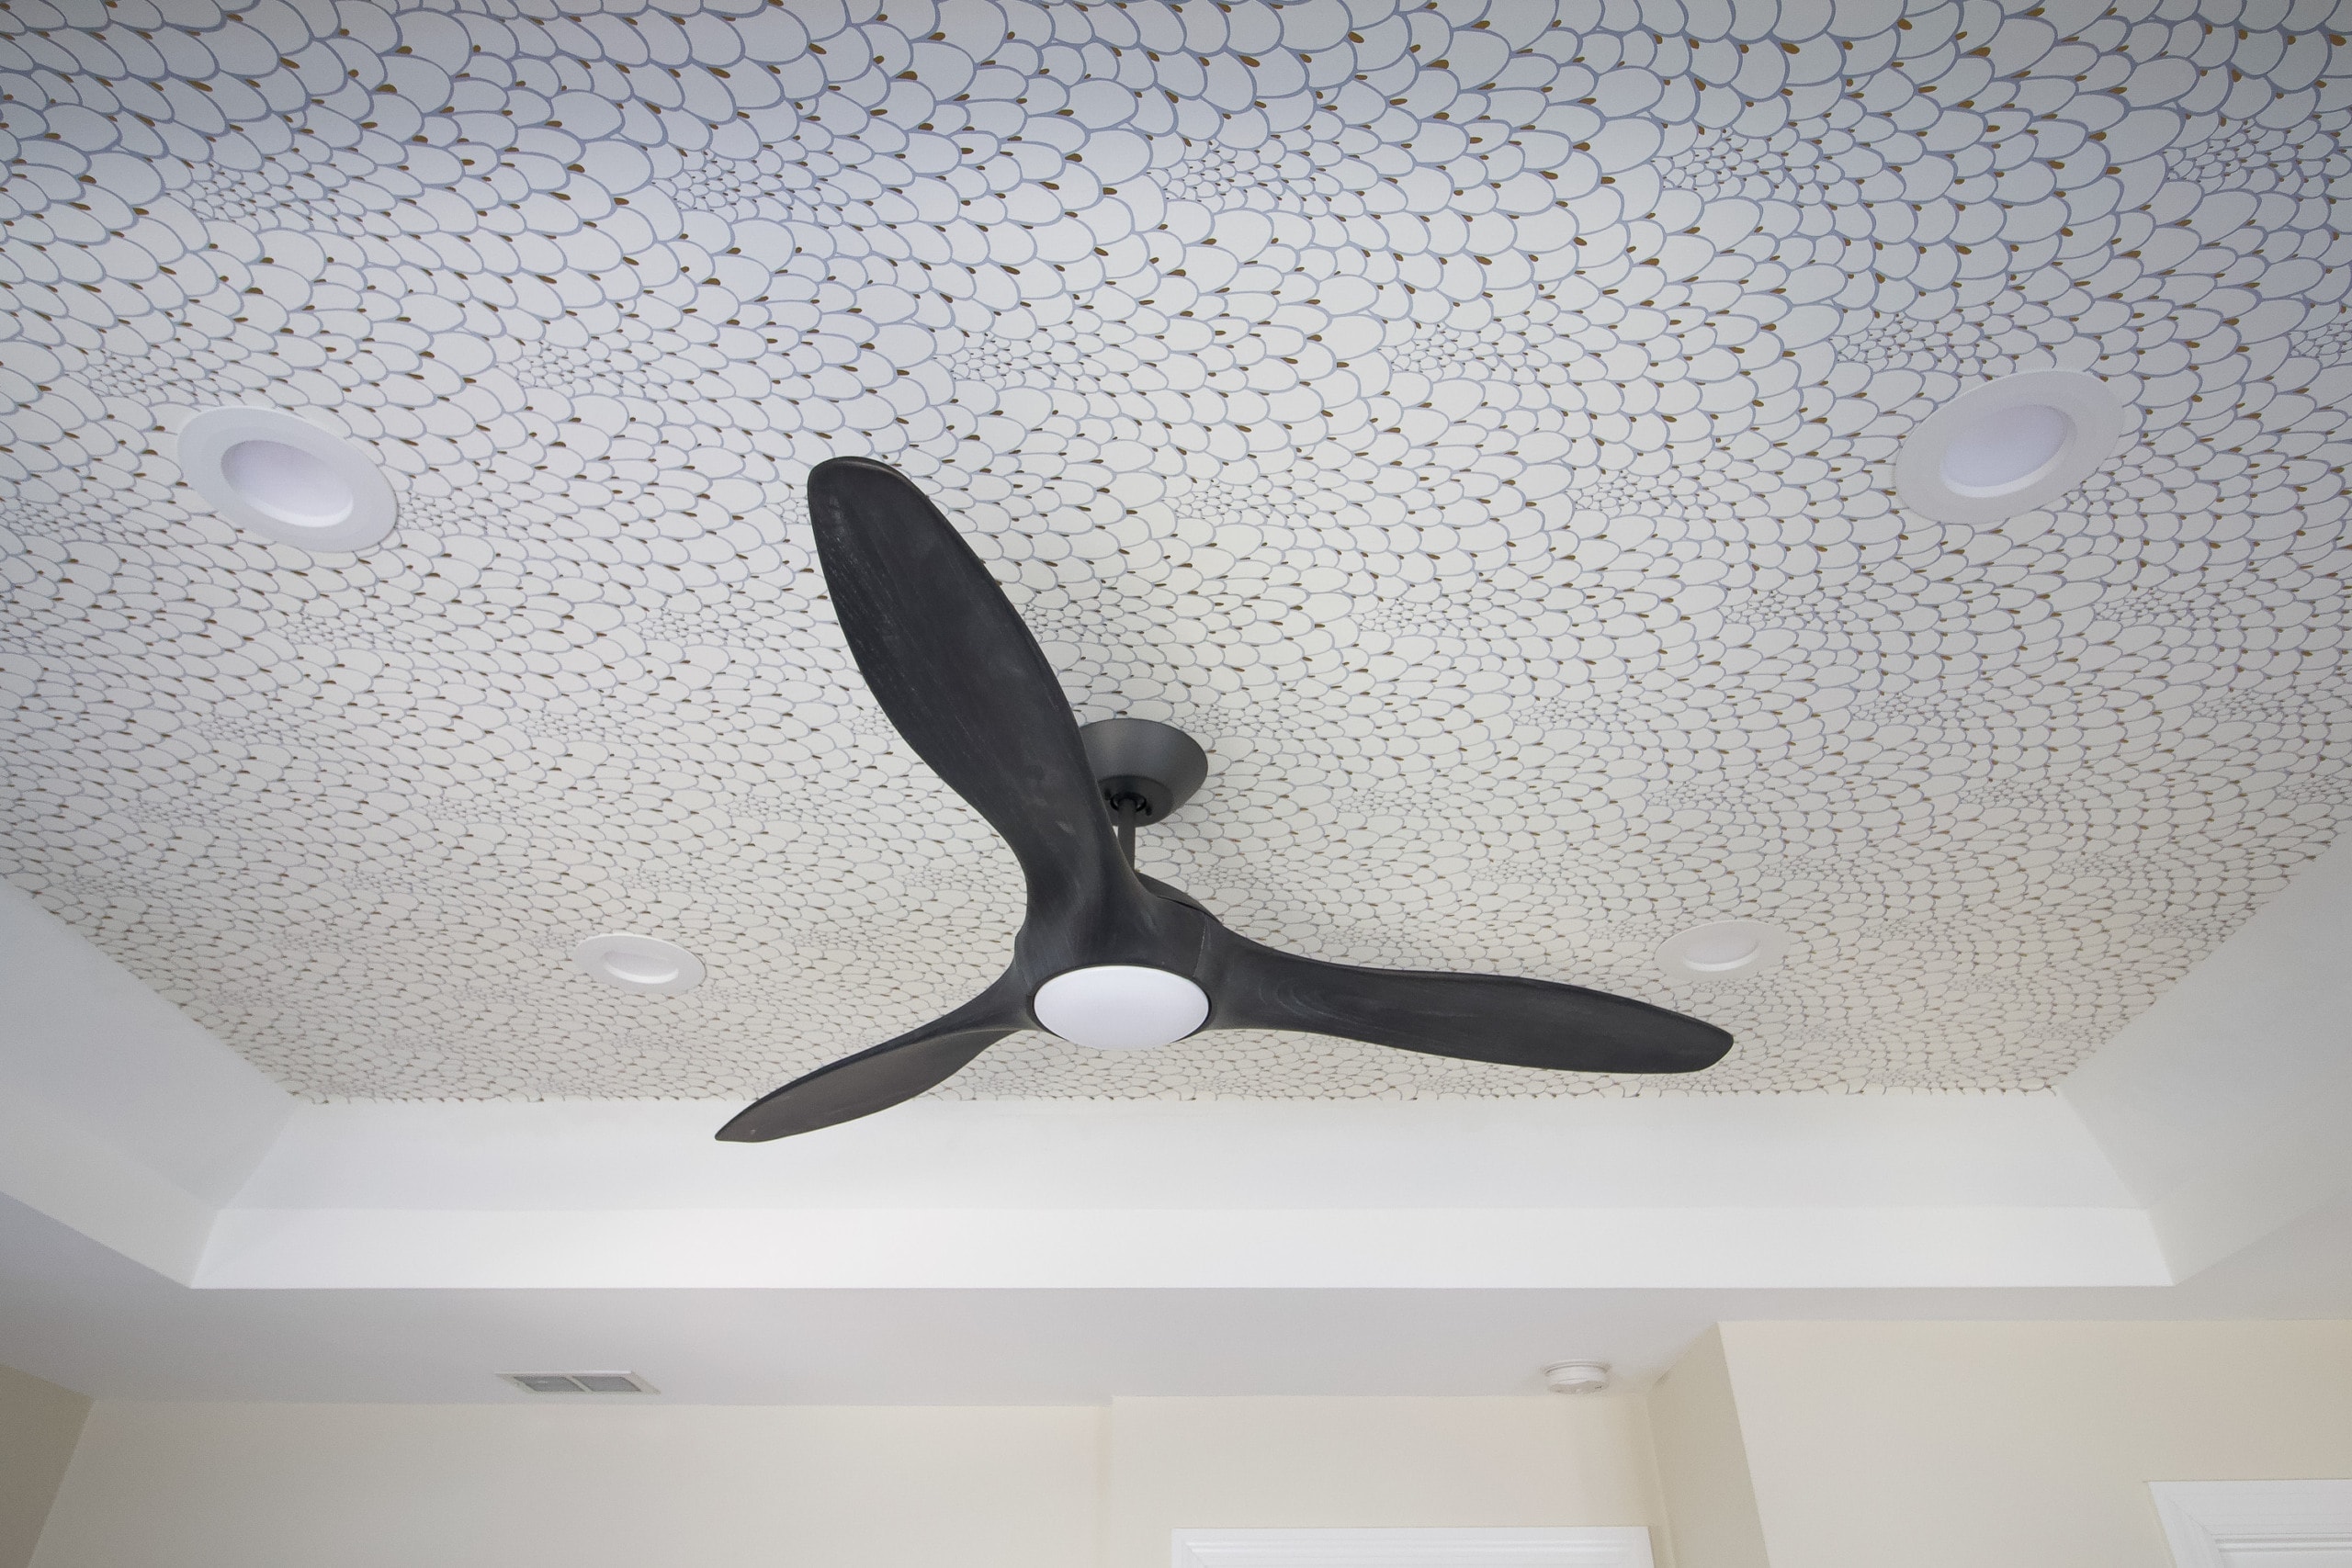 Tips to wallpaper the ceiling